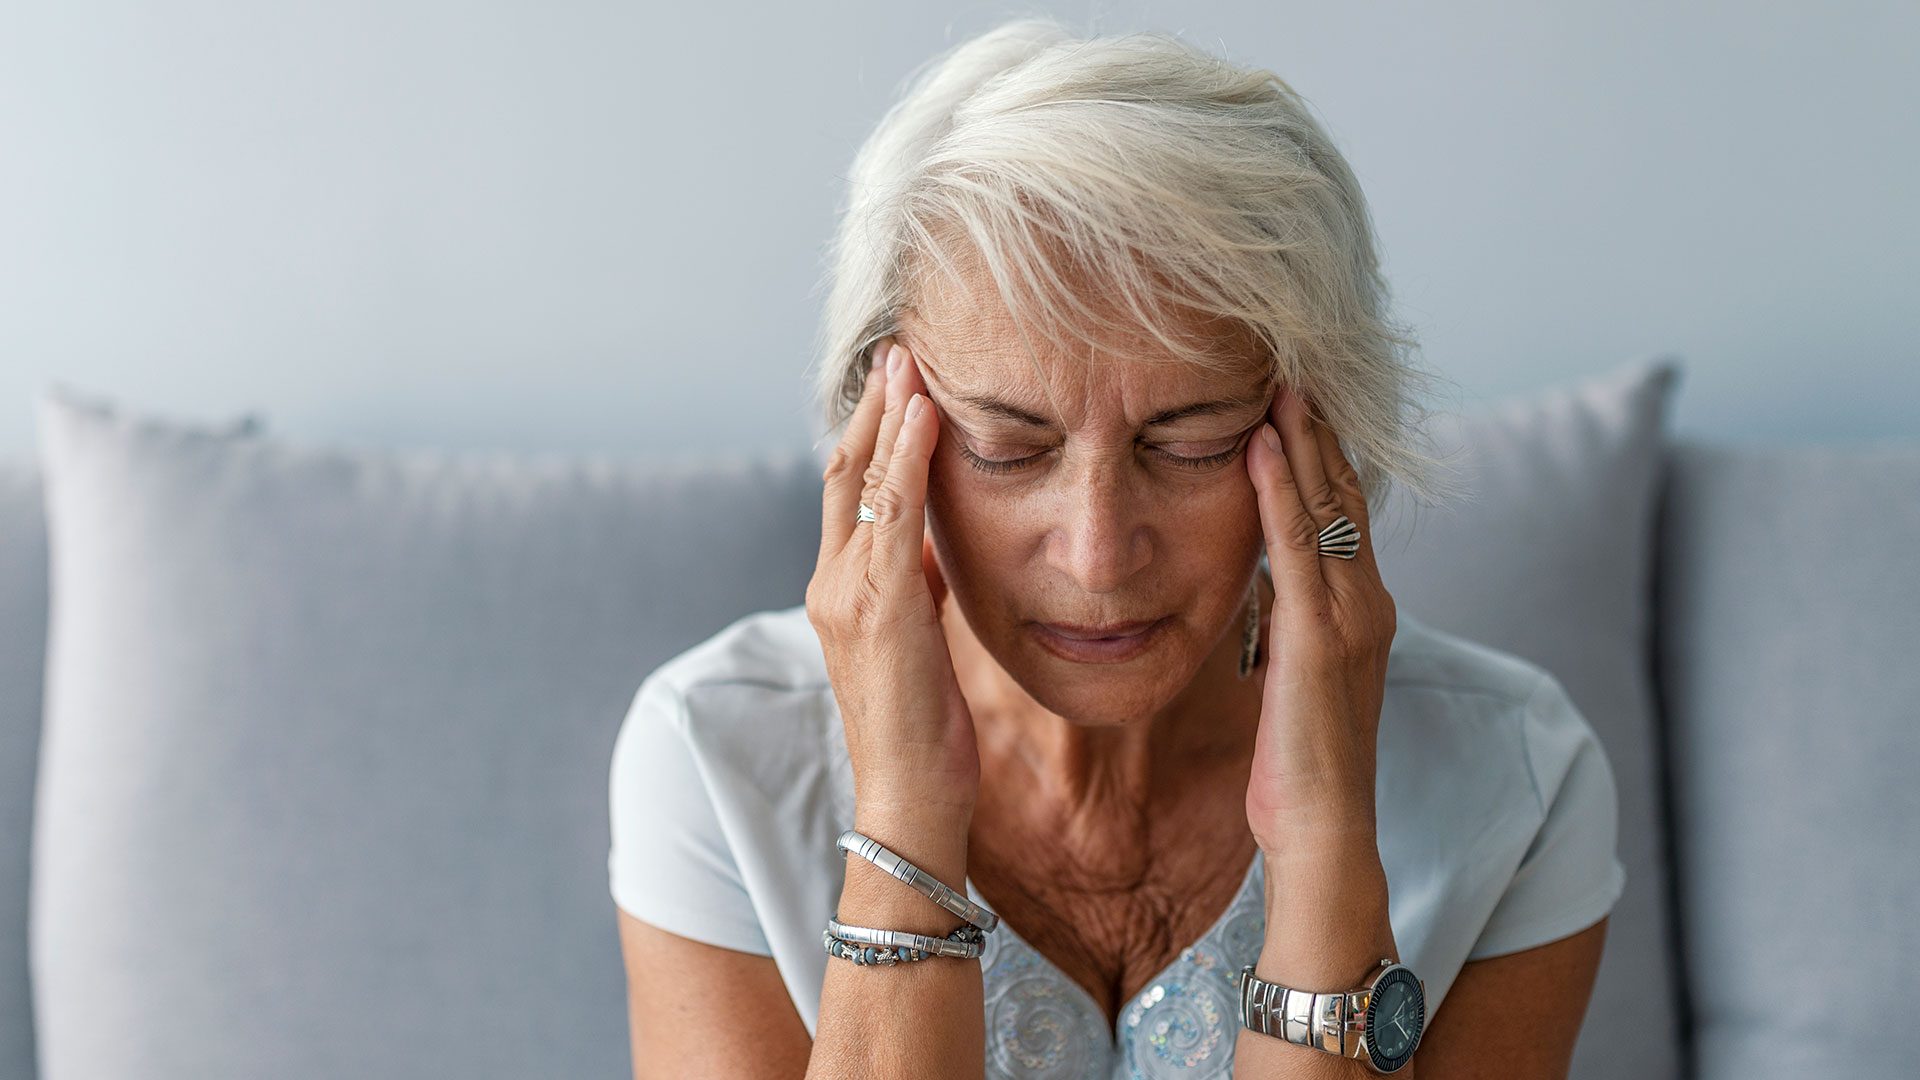 Novel Therapy for Acute Migraine Shows Promise in Phase 3 Clinical Trial